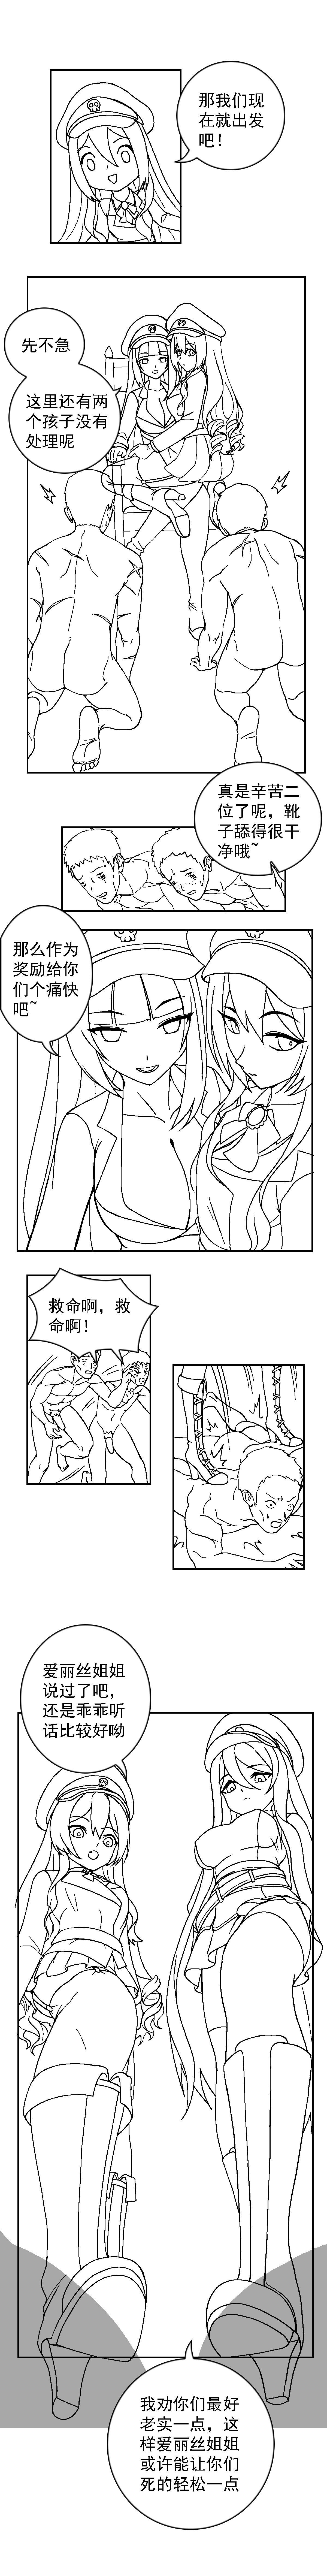 Free Fucking [Weixiefashi] The Cruel Empire Executioners black-and-white [帝国处刑官爱丽丝2：残酷的处刑天使][黑白] Big Ass - Page 5